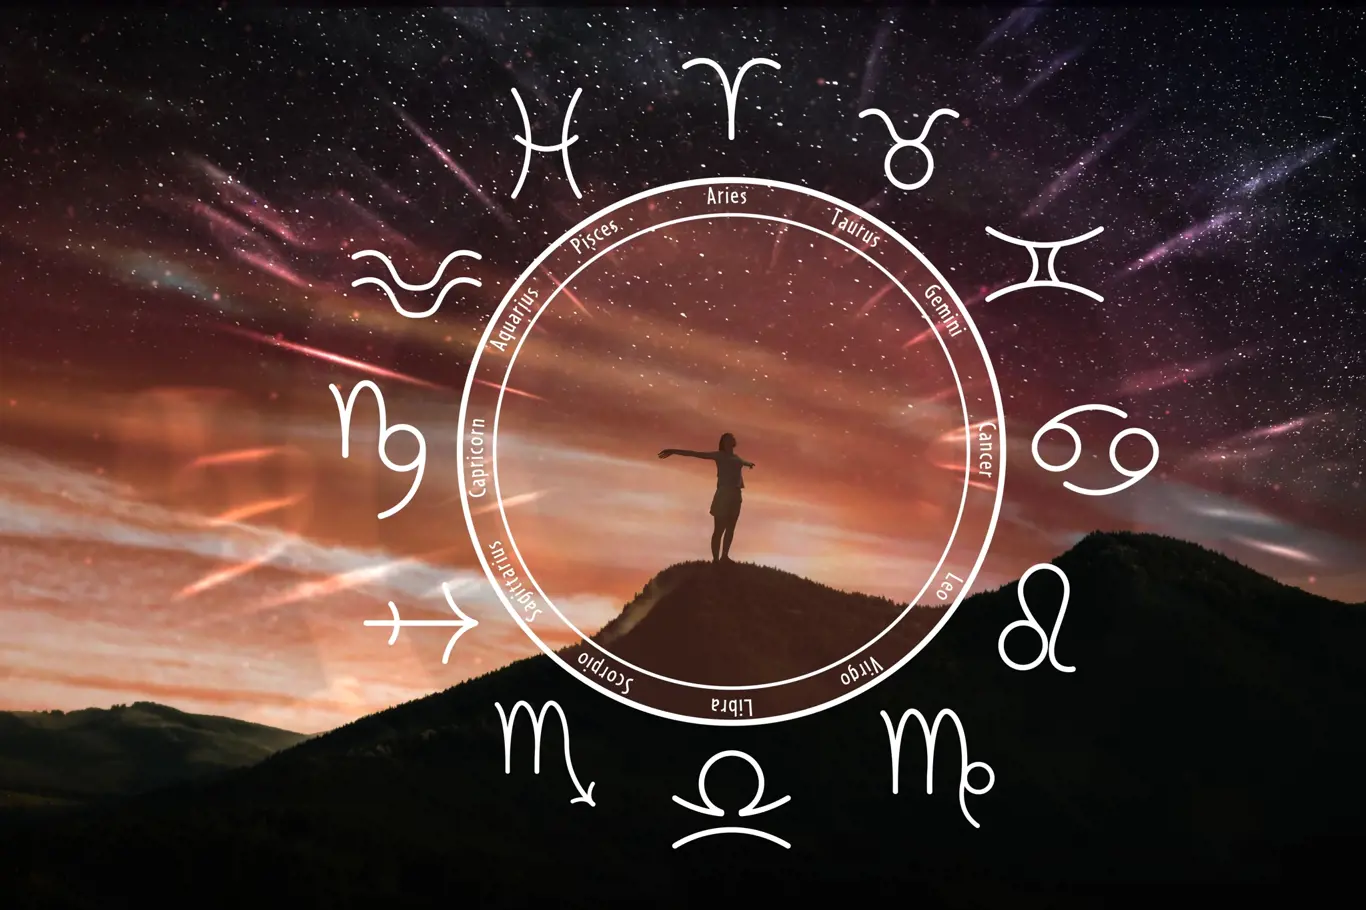 Zodiac wheel and photo of woman in mountains under starry sky. Banner design